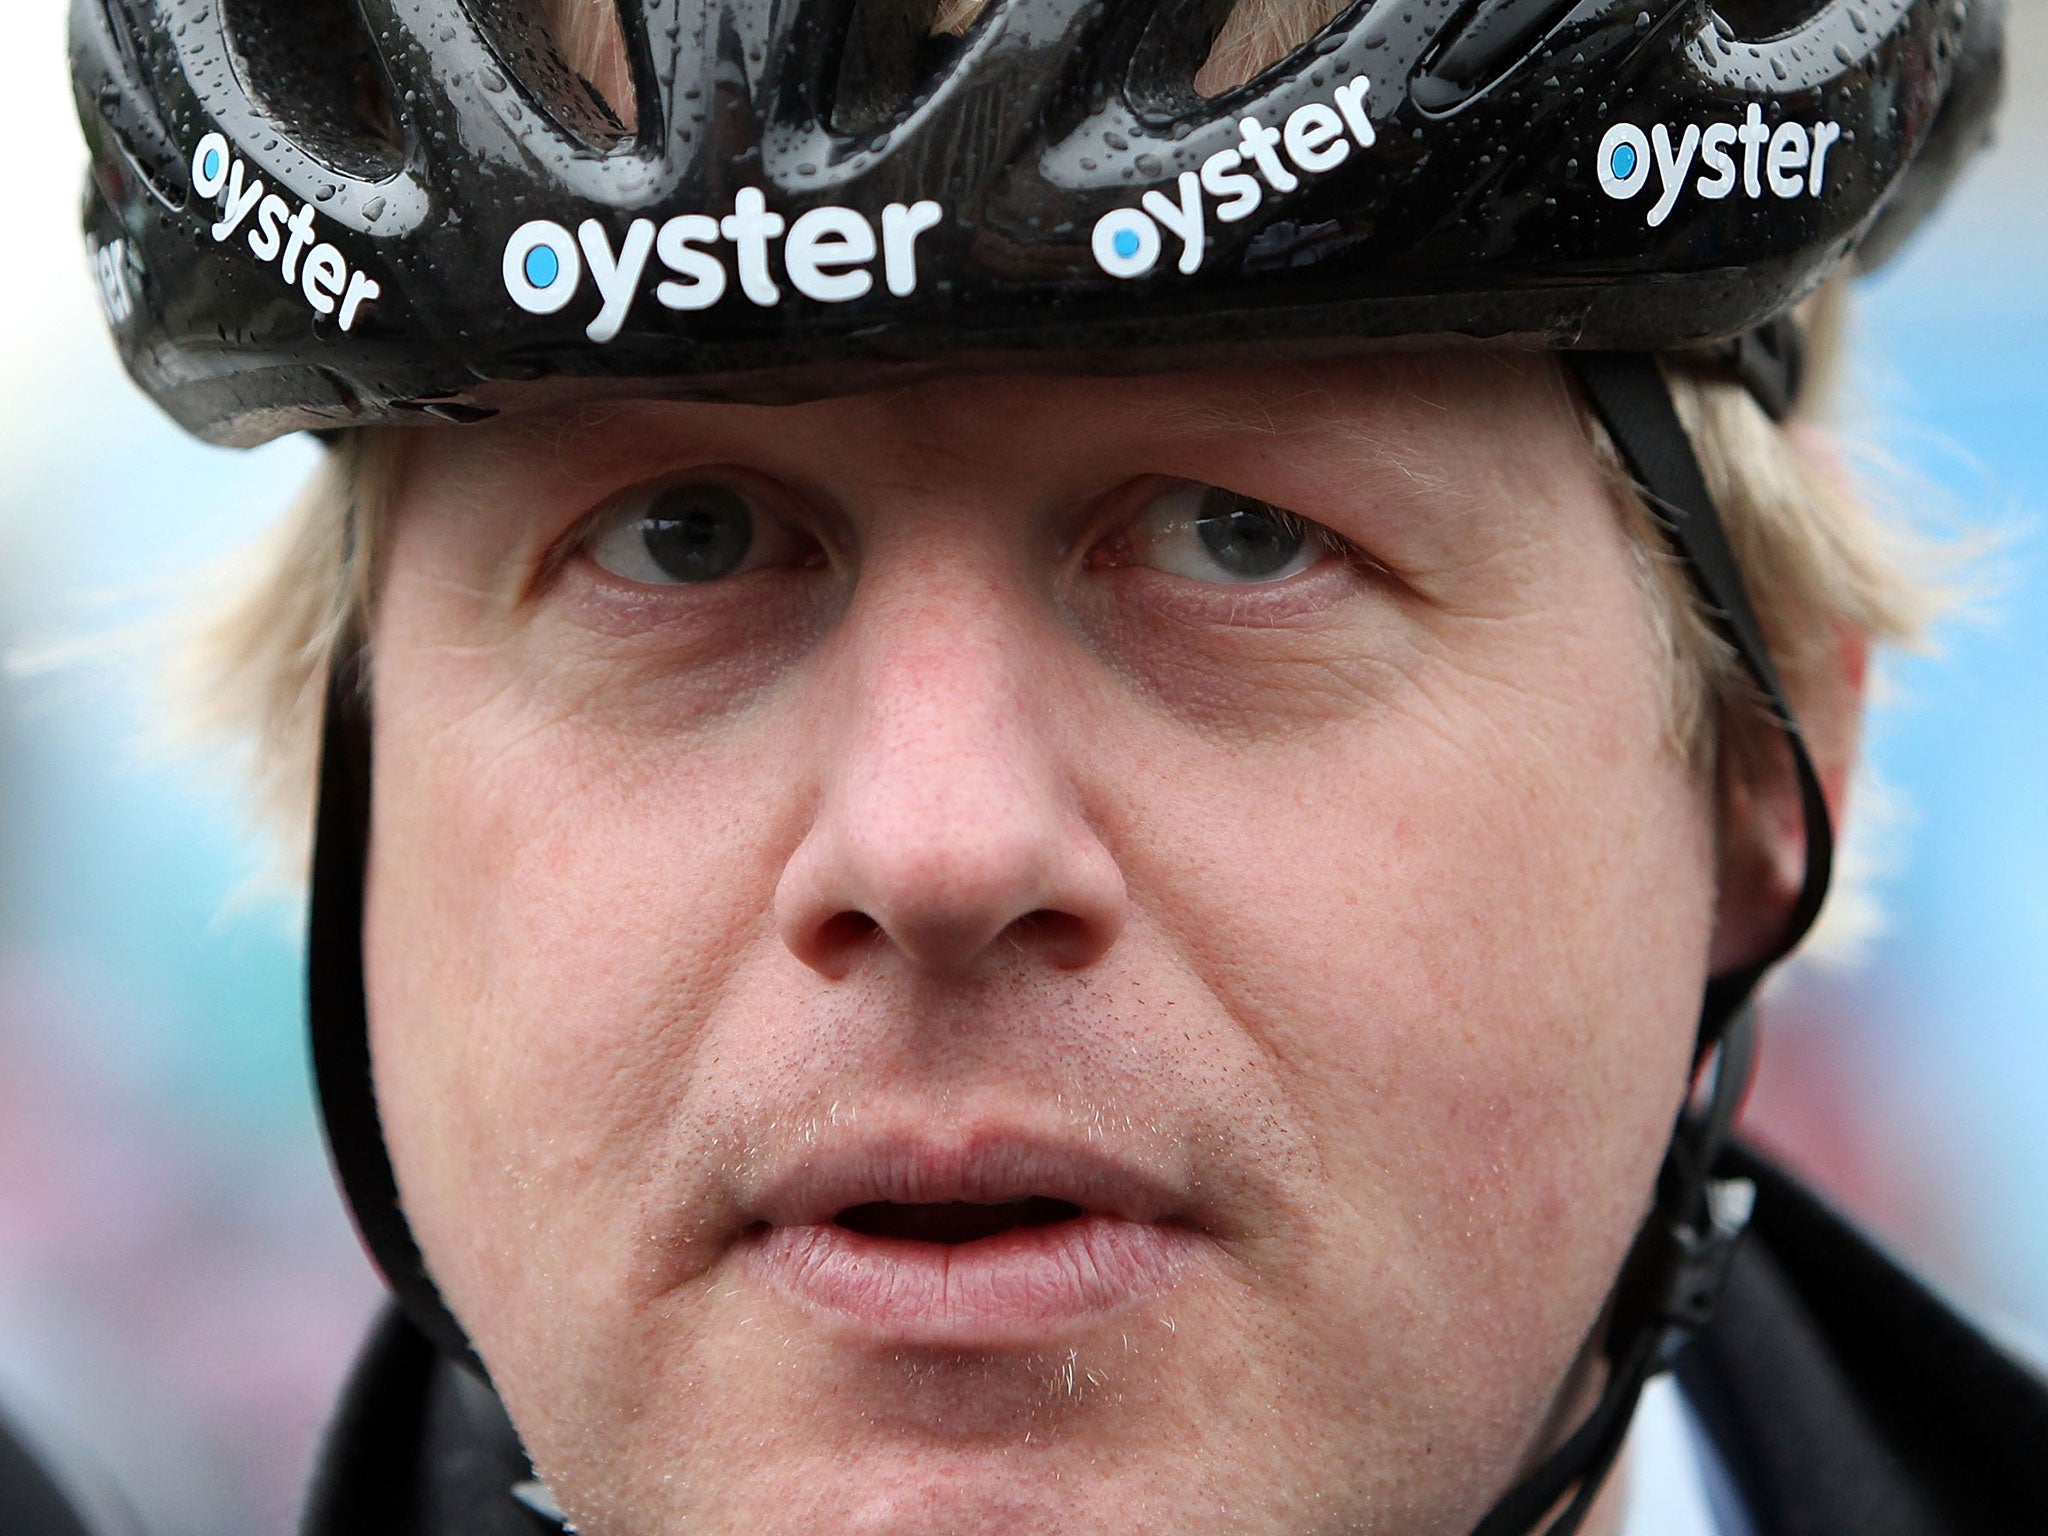 Mr Johnson said the route’s opening ceremony would include women ‘glistening like wet otters’